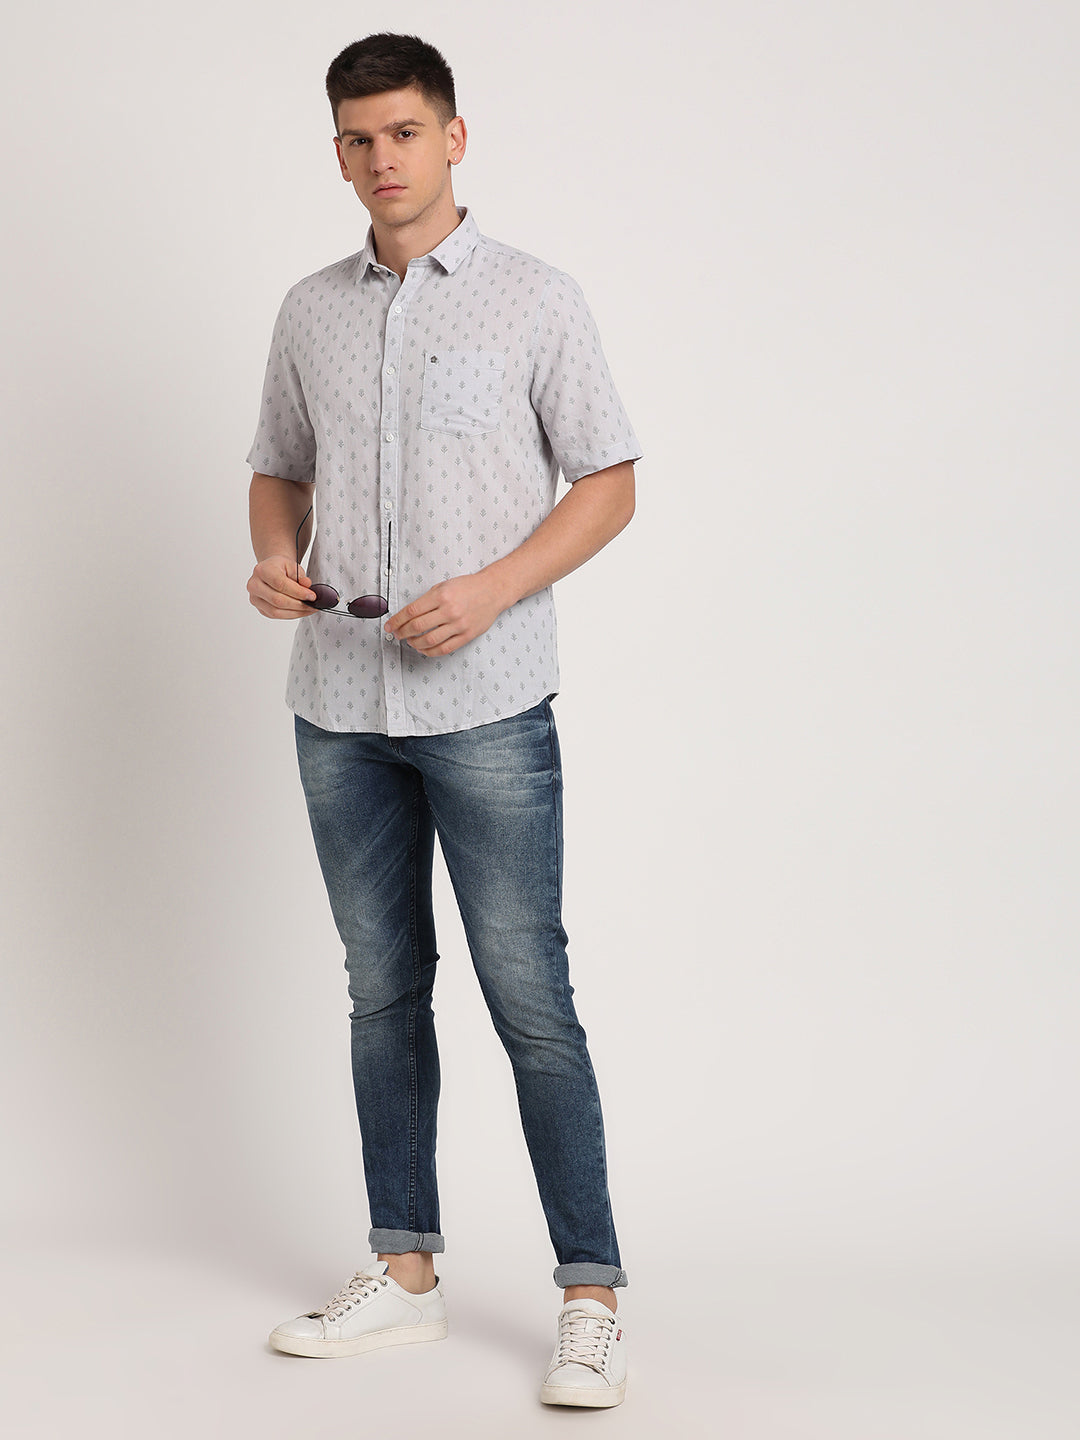 Cotton Linen Off White Printed Slim Fit Half Sleeve Casual Shirt